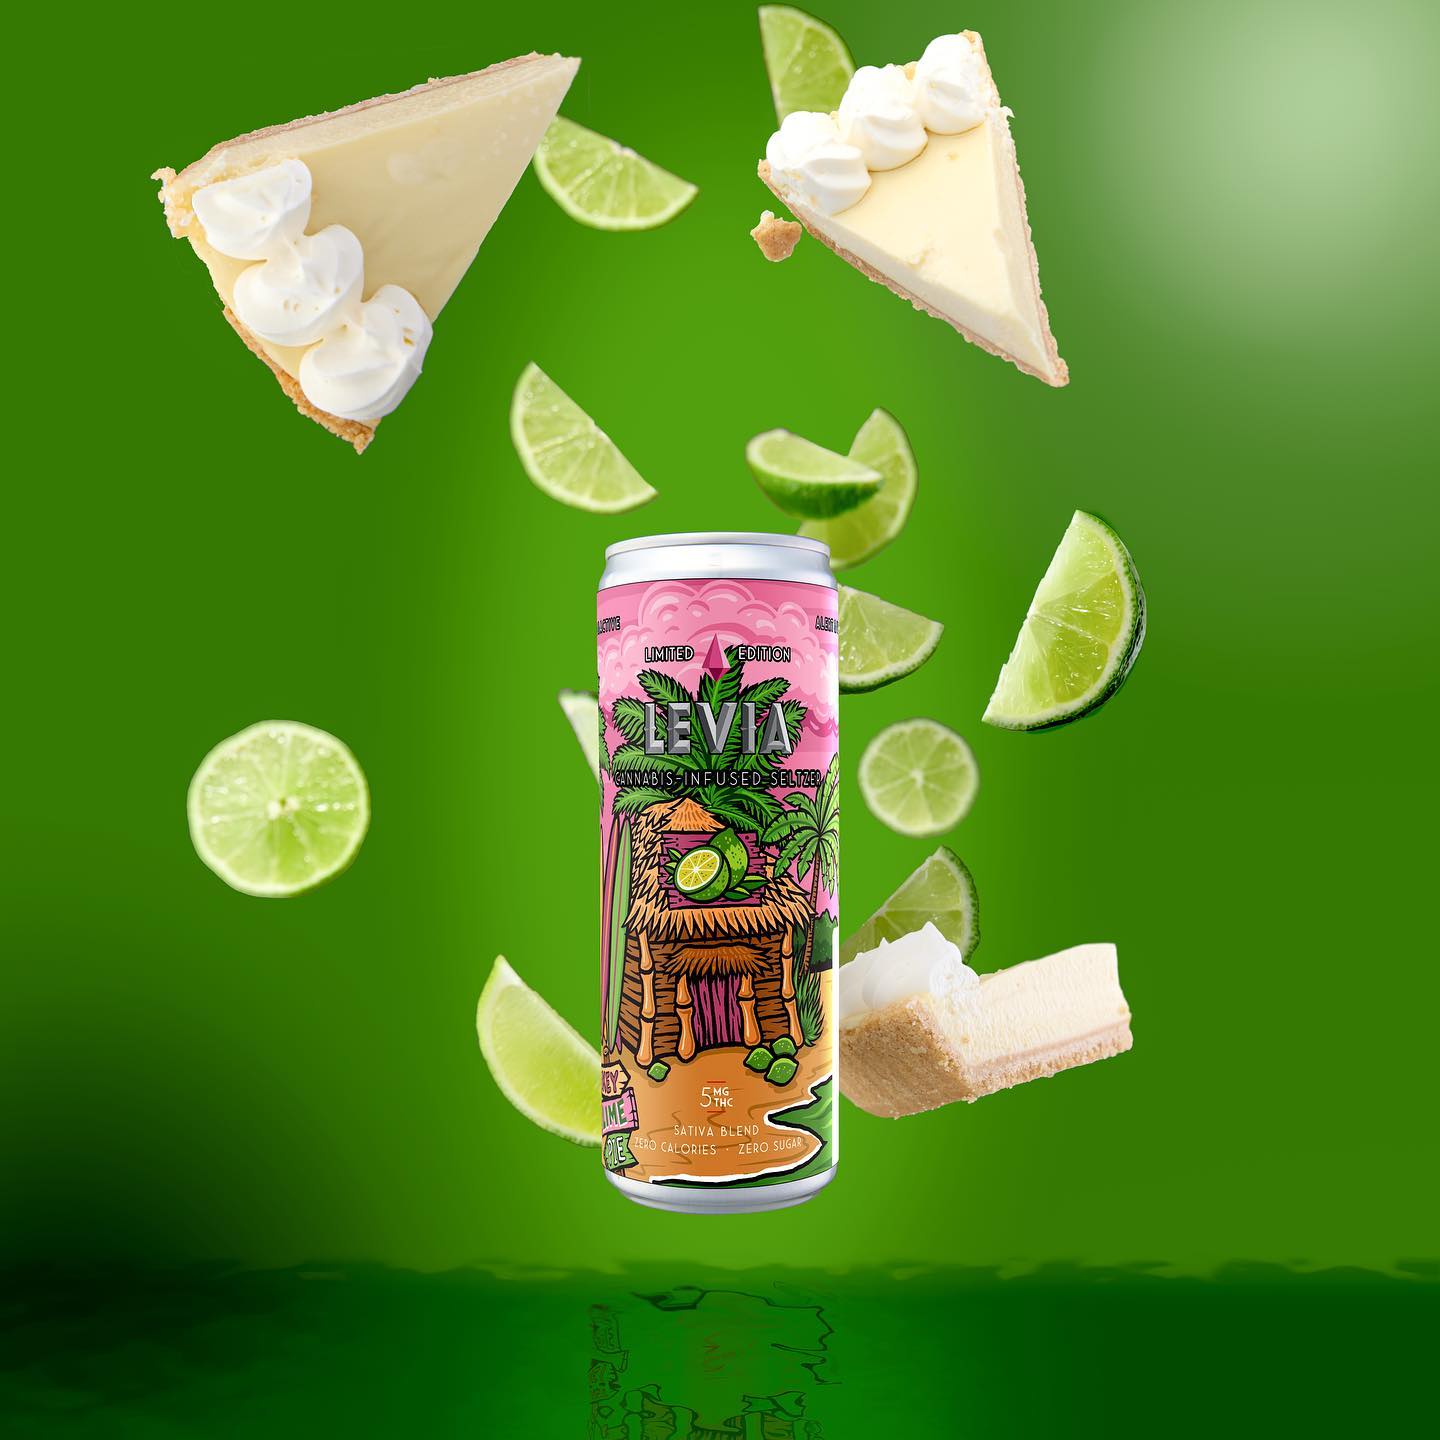 Spring has sprung and we are celebrating with our newest seasonal flavor Key Lime Pie Happy first day of Spring